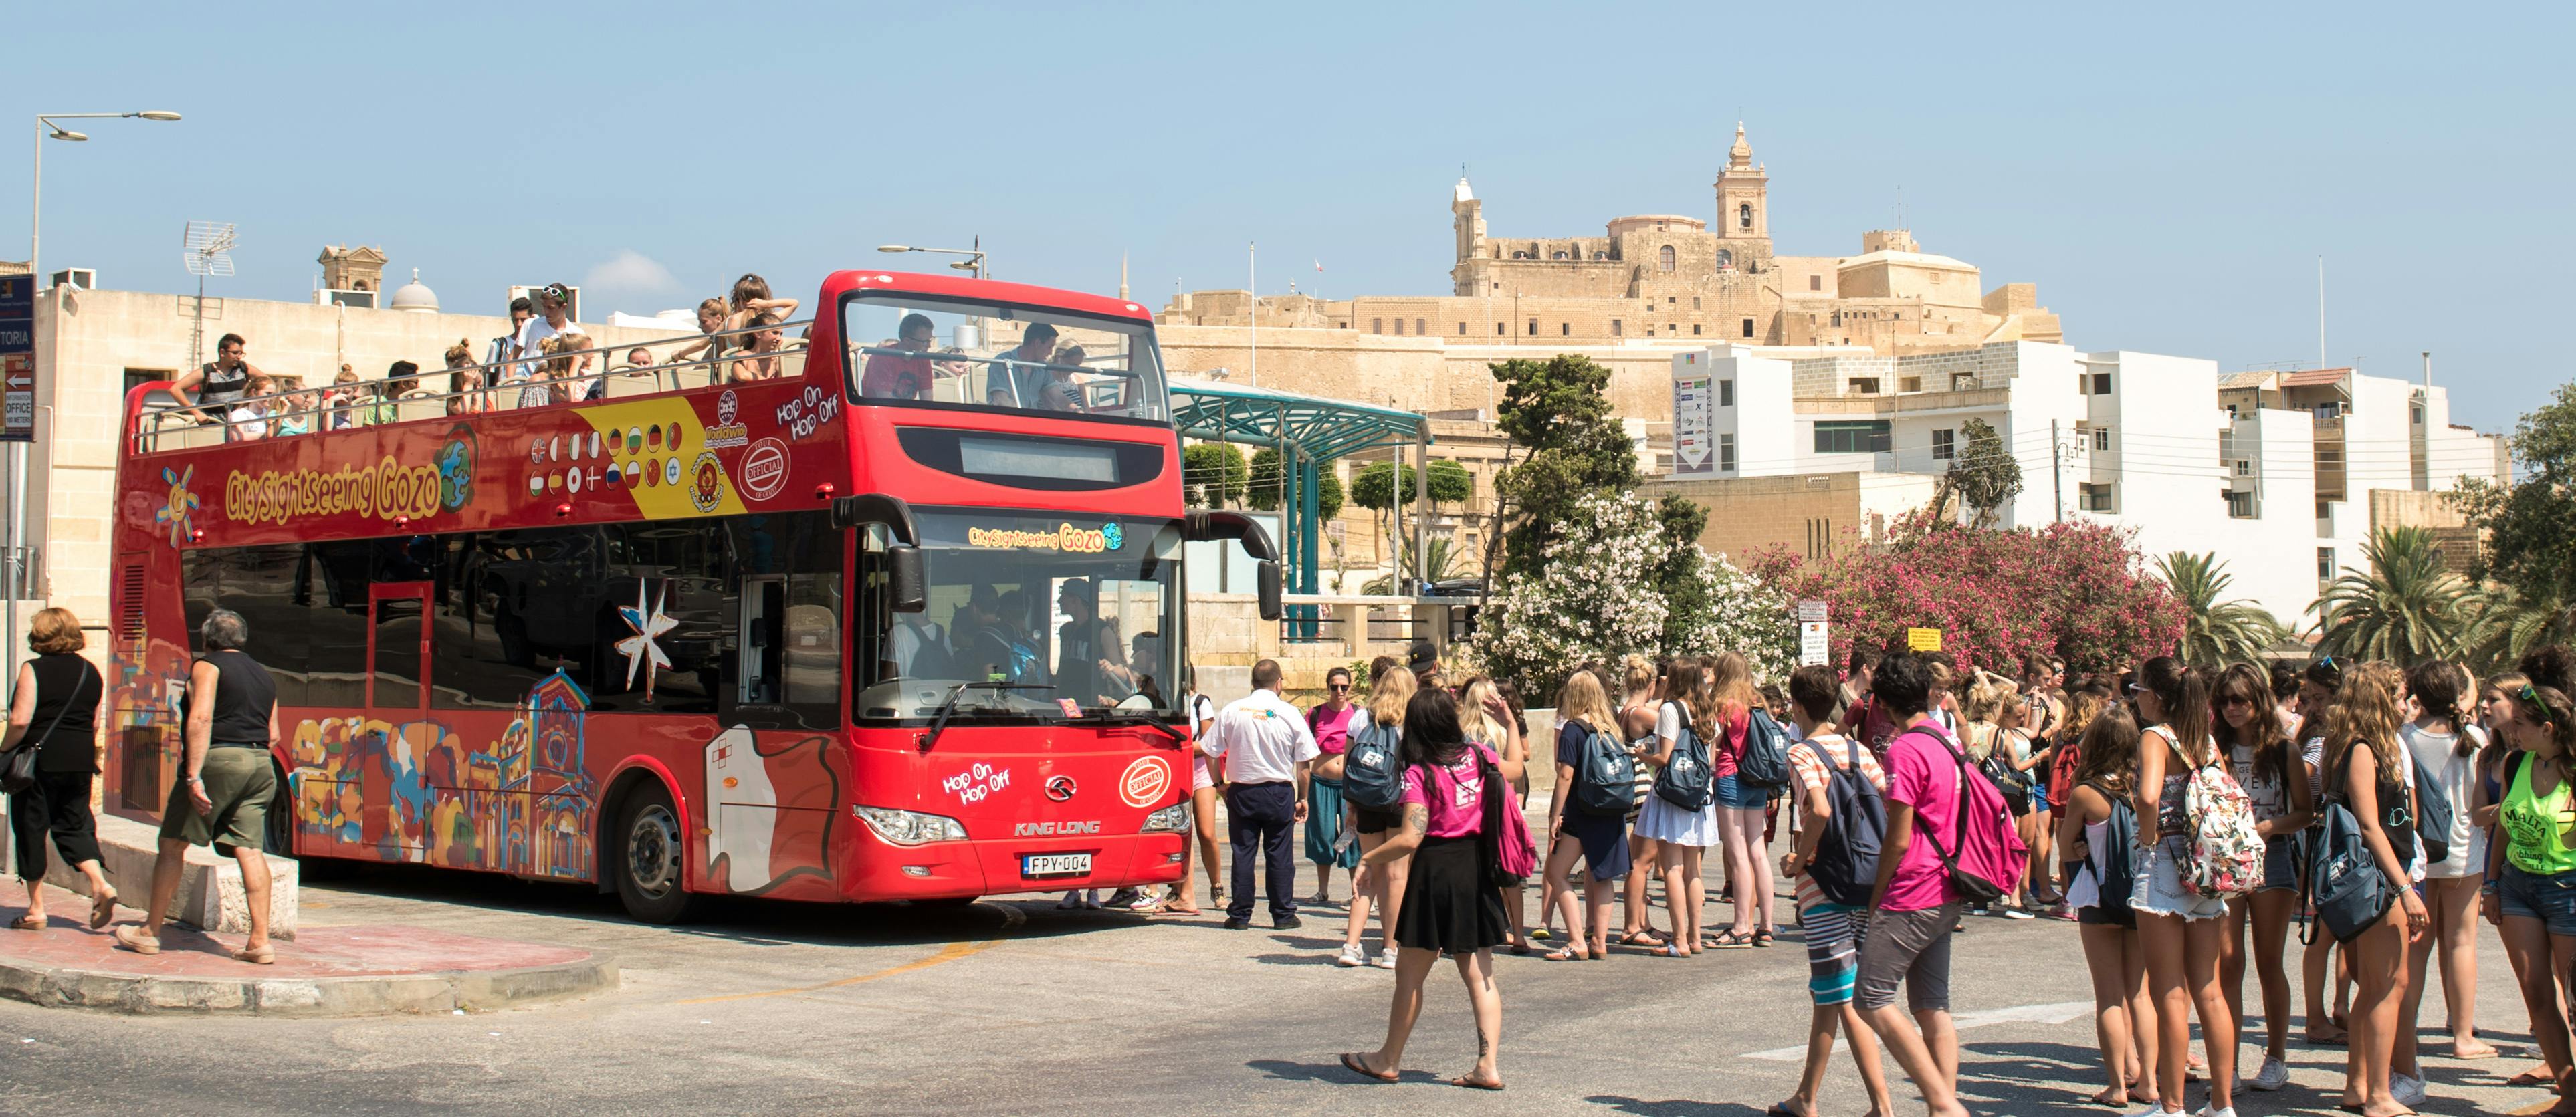 City Sightseeing hop-on hop-off bus tour of Gozo